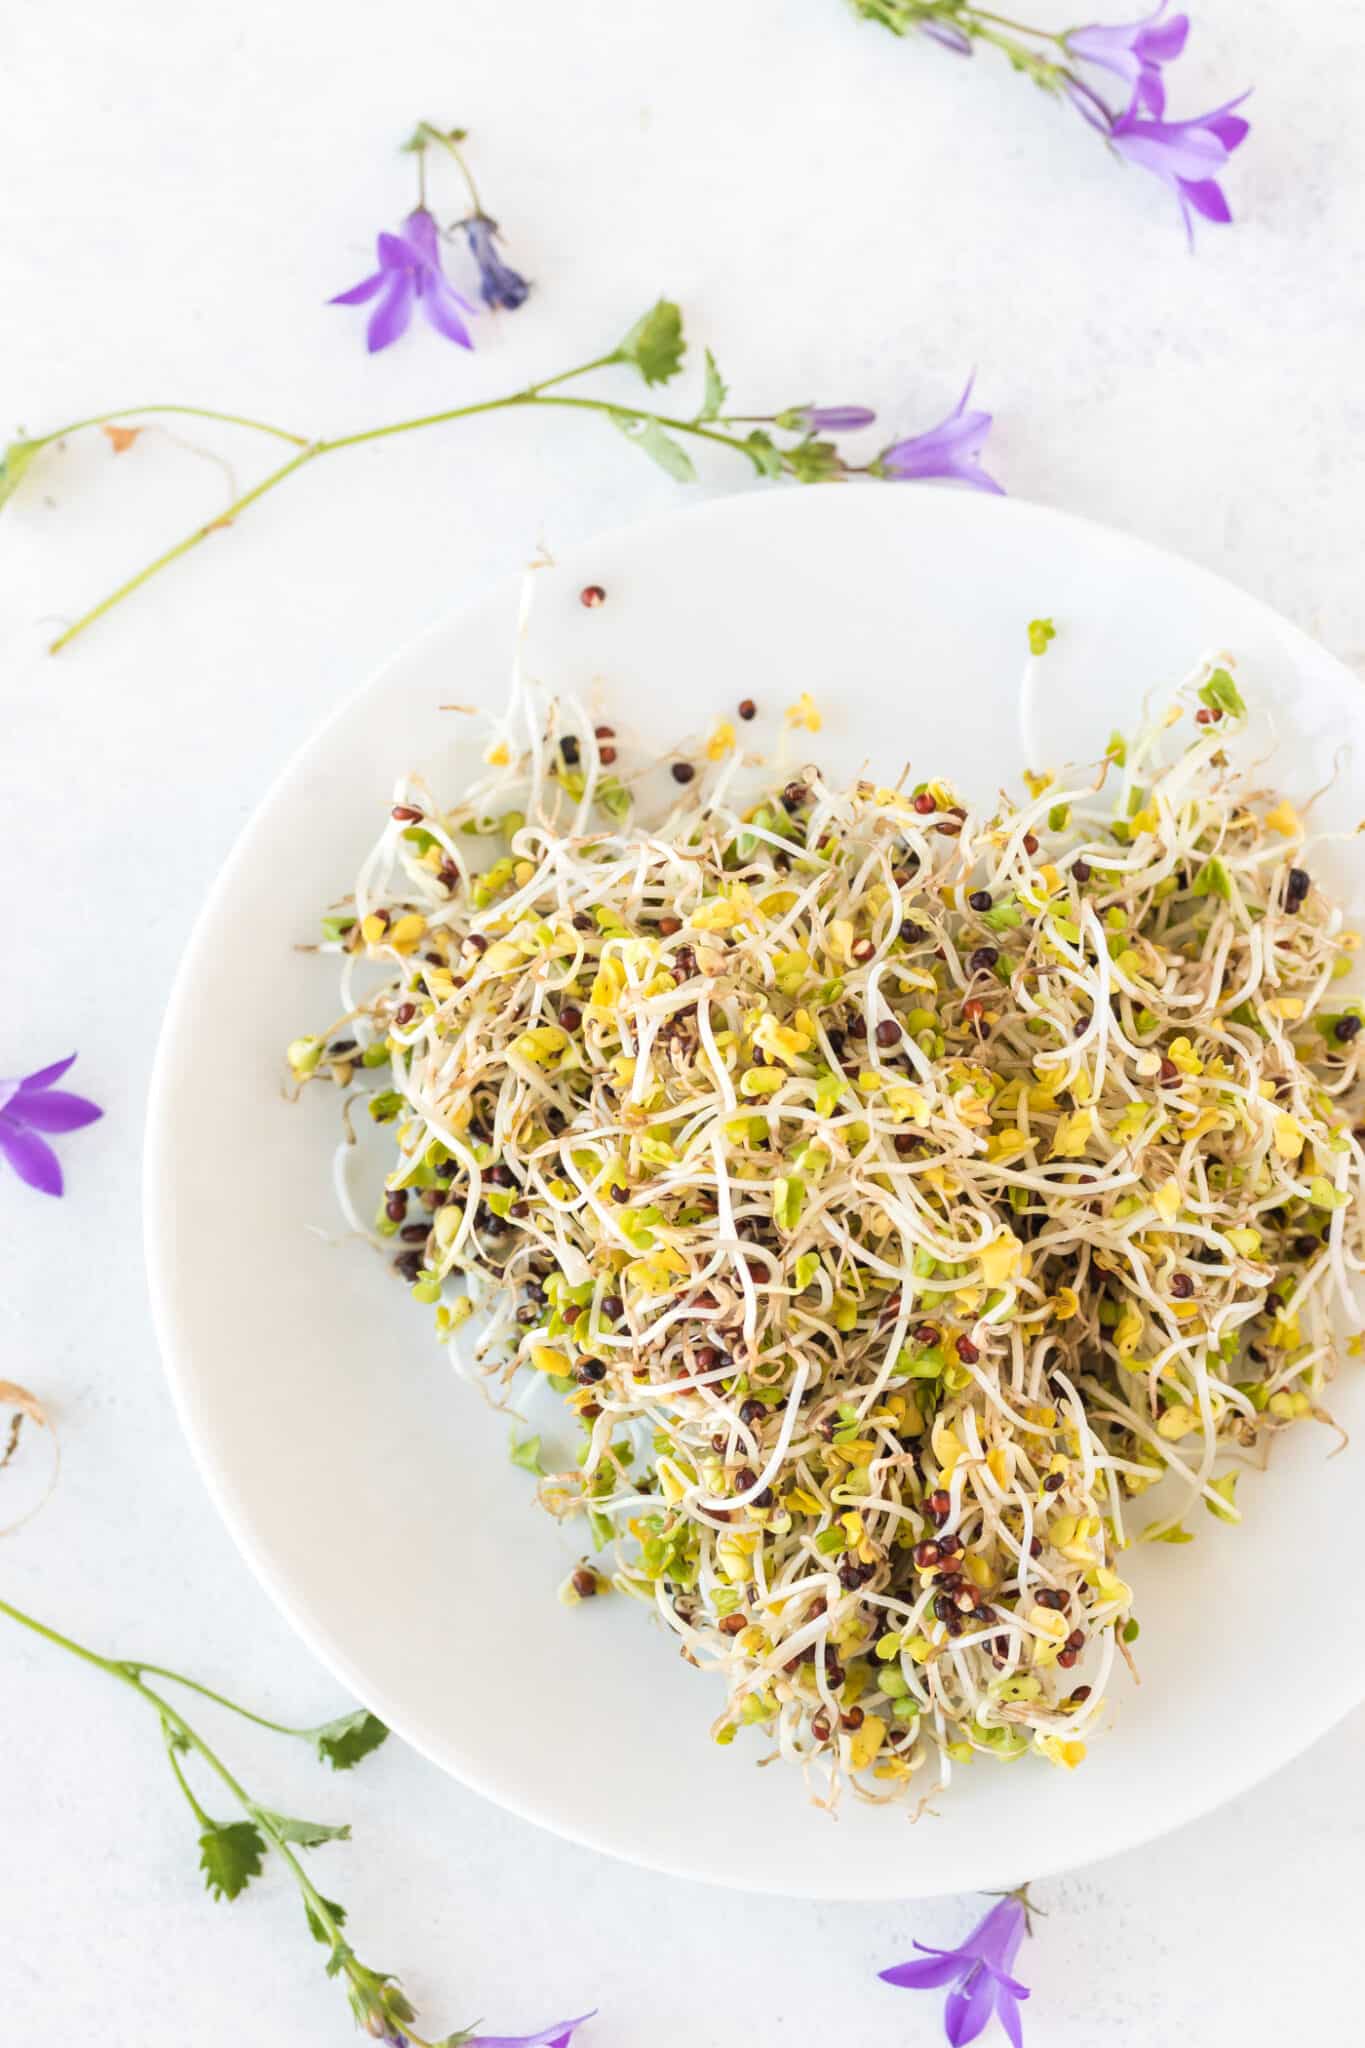 How to Grow Broccoli Sprouts (Step-By-Step Guide)